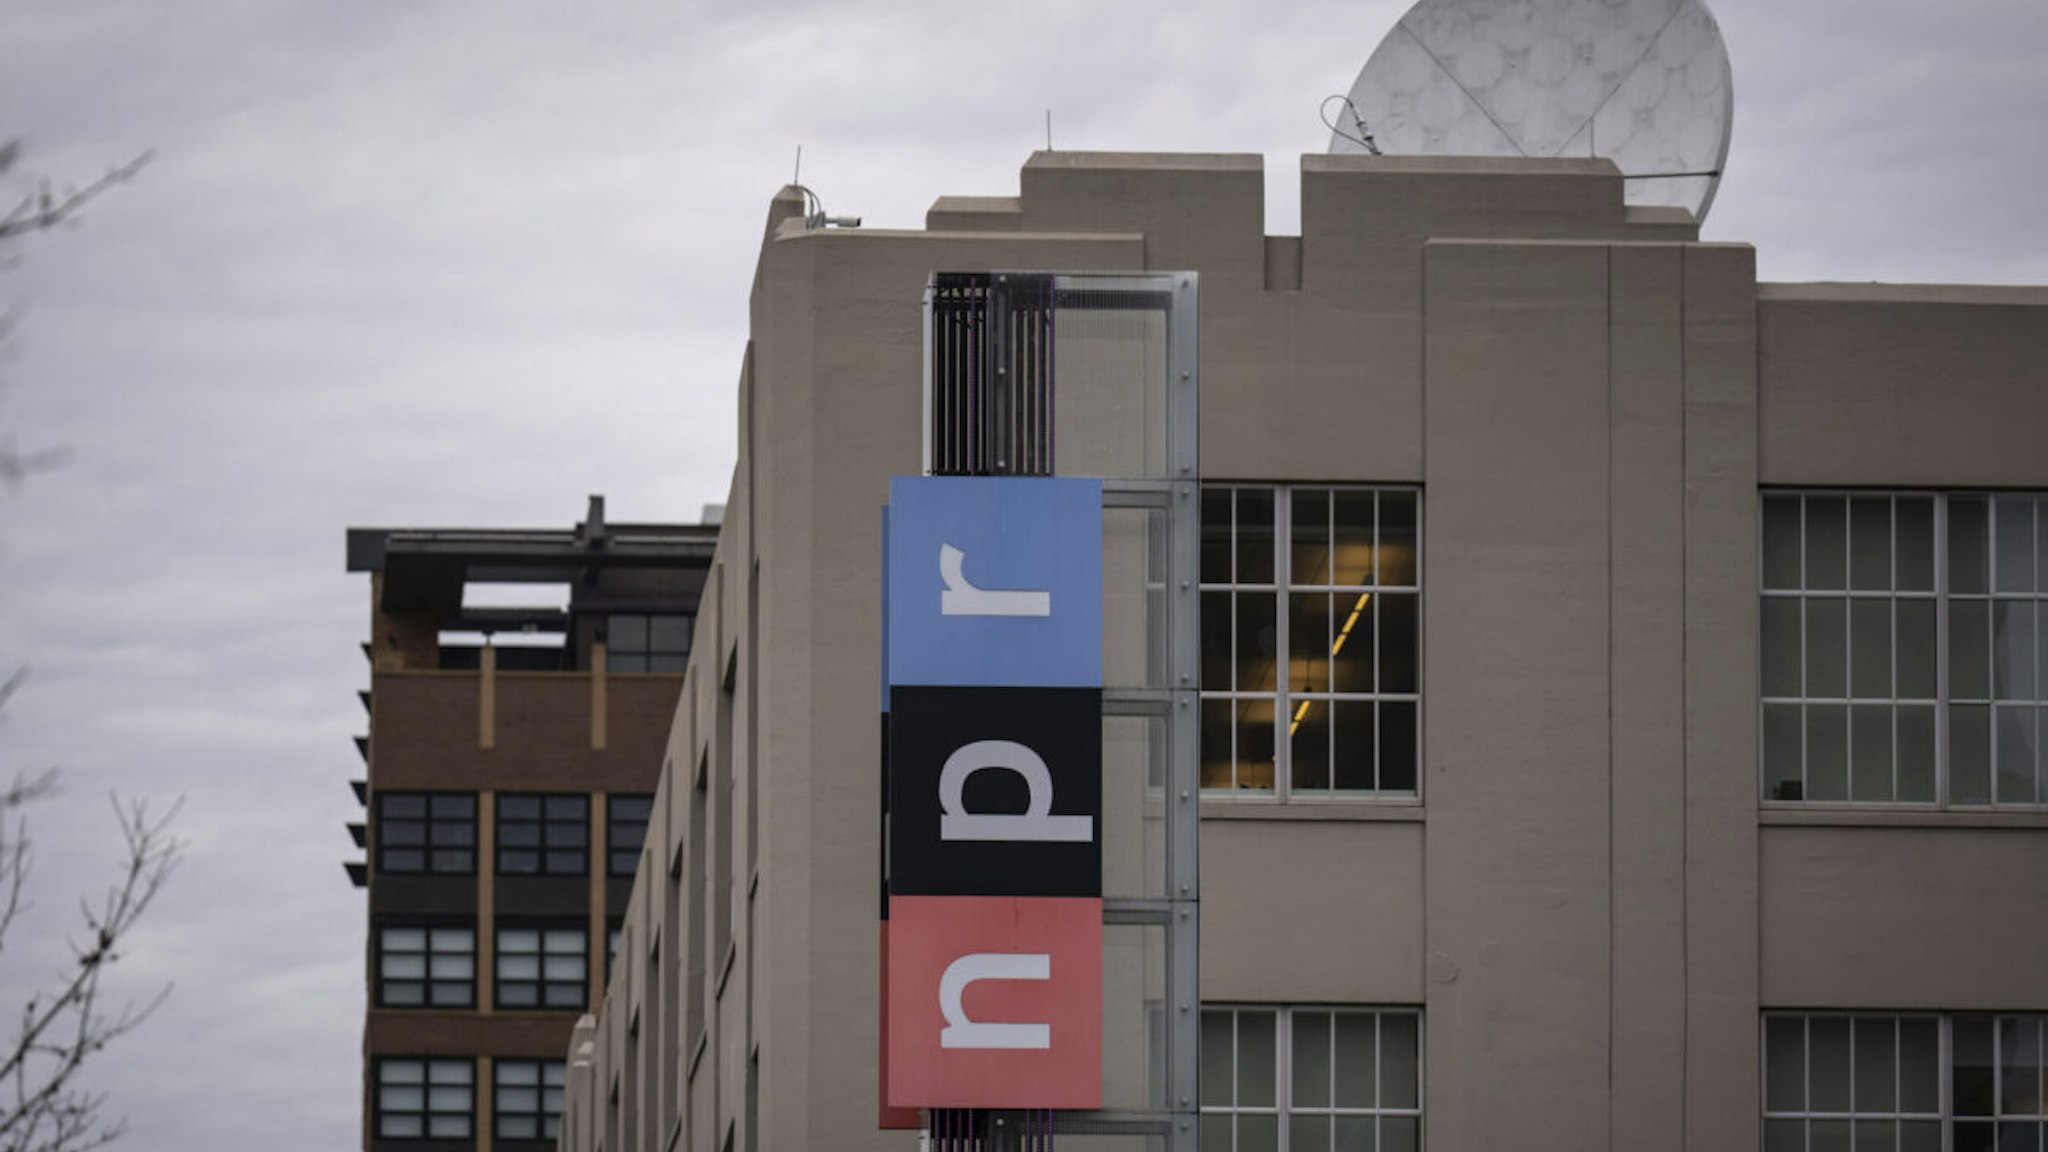 A view of the National Public Radio (NPR) headquarters on North Capitol Street February 22, 2023 in Washington, DC.